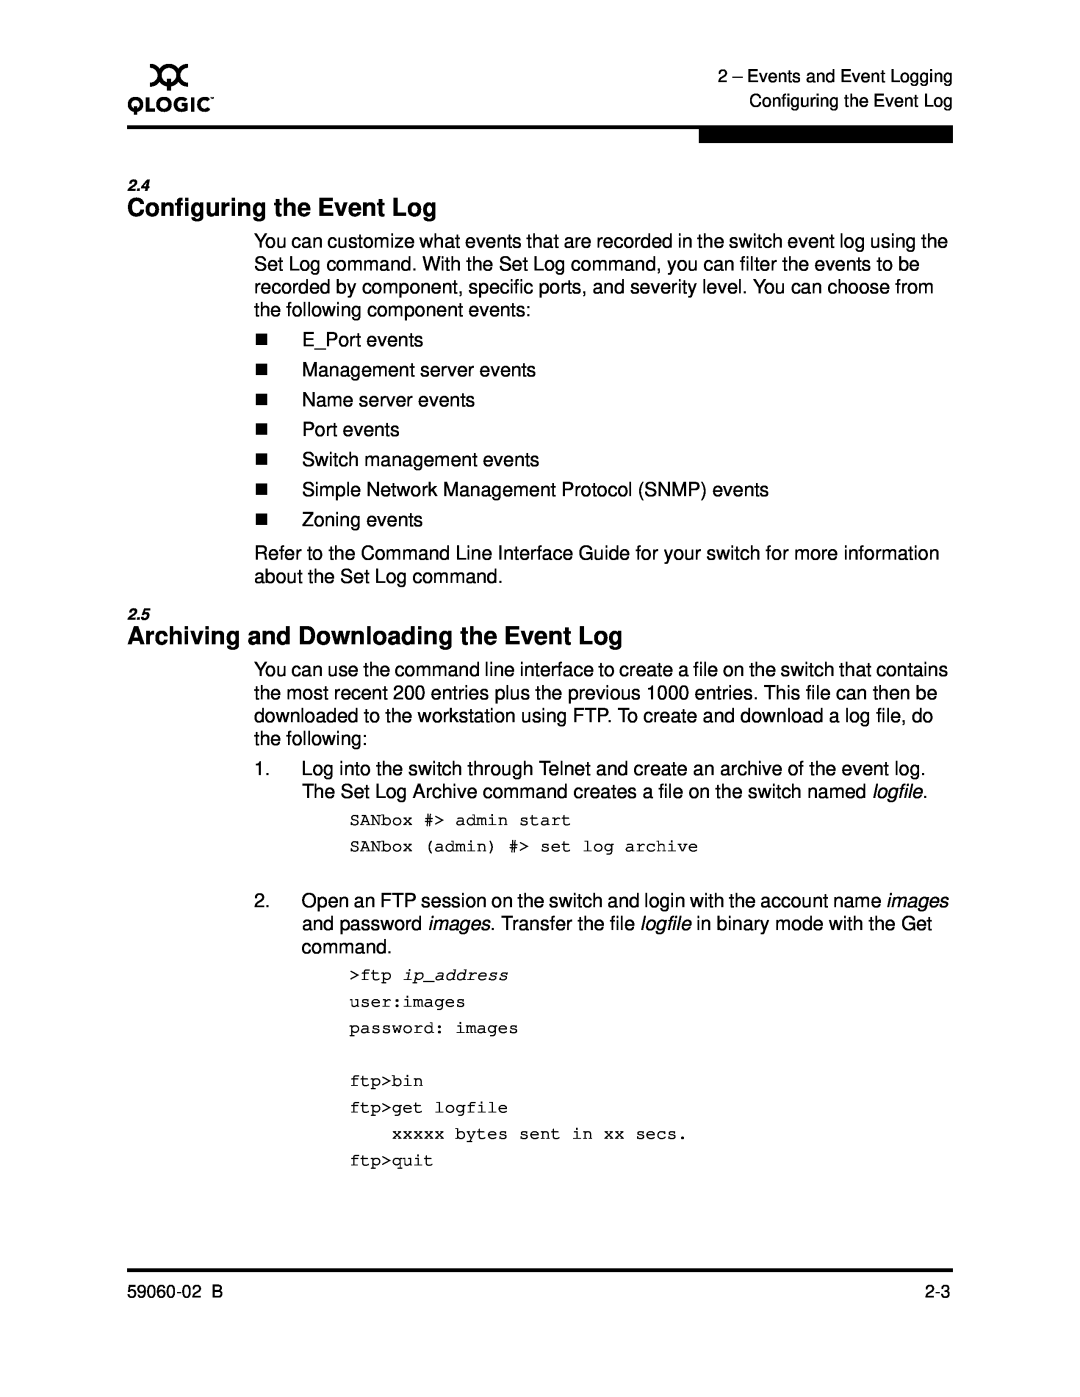 Q-Logic 59060-02 B manual Configuring the Event Log, Archiving and Downloading the Event Log 